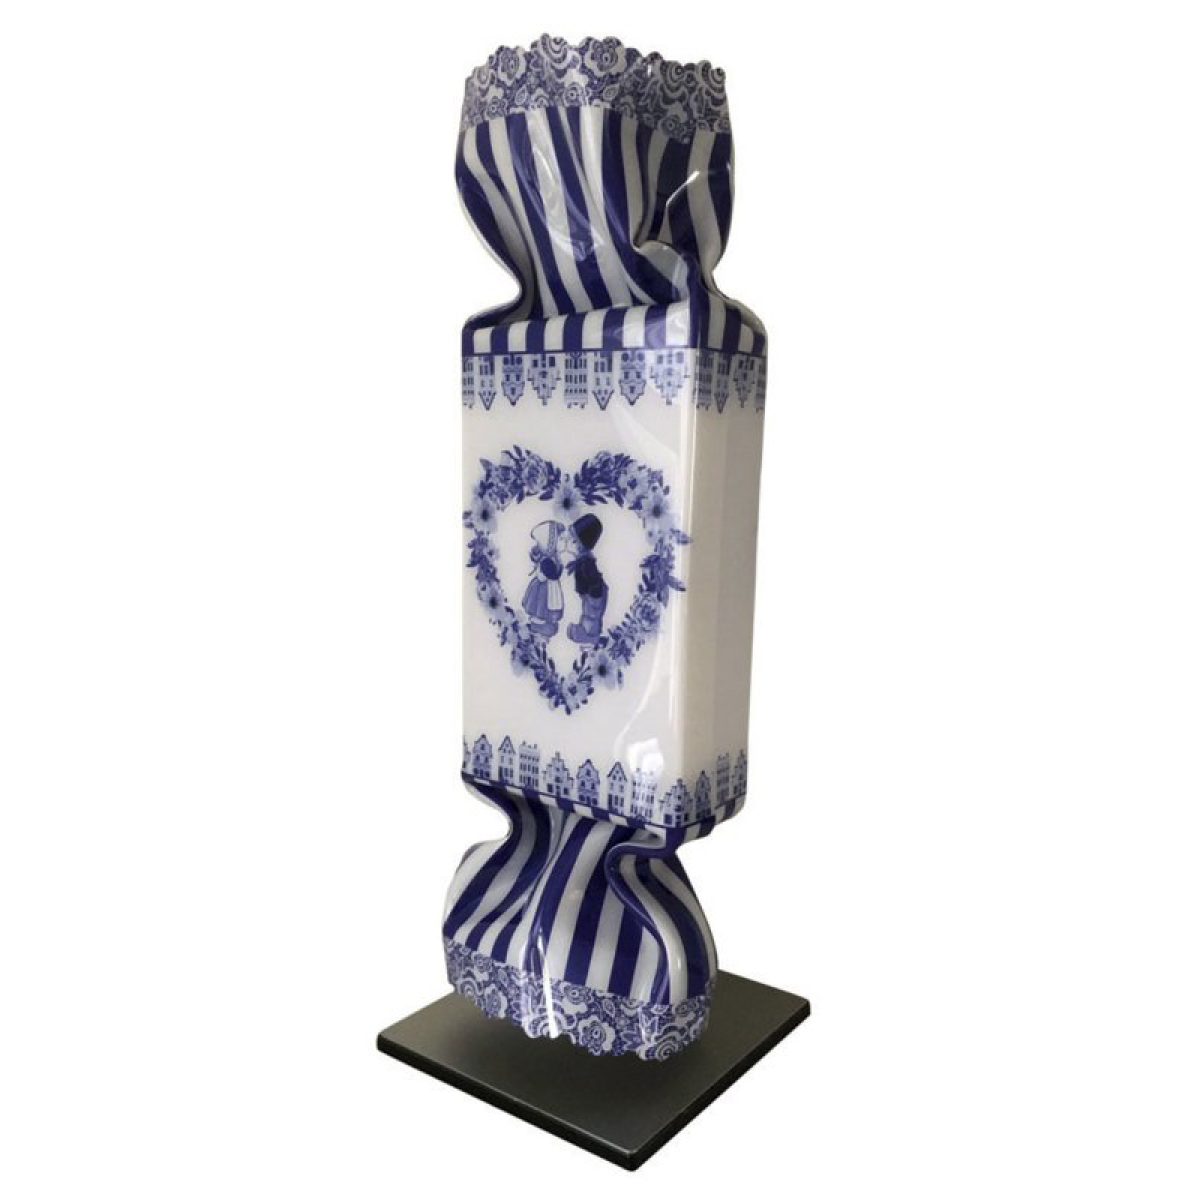 Art Candy Toffee – Delft’s Blauw